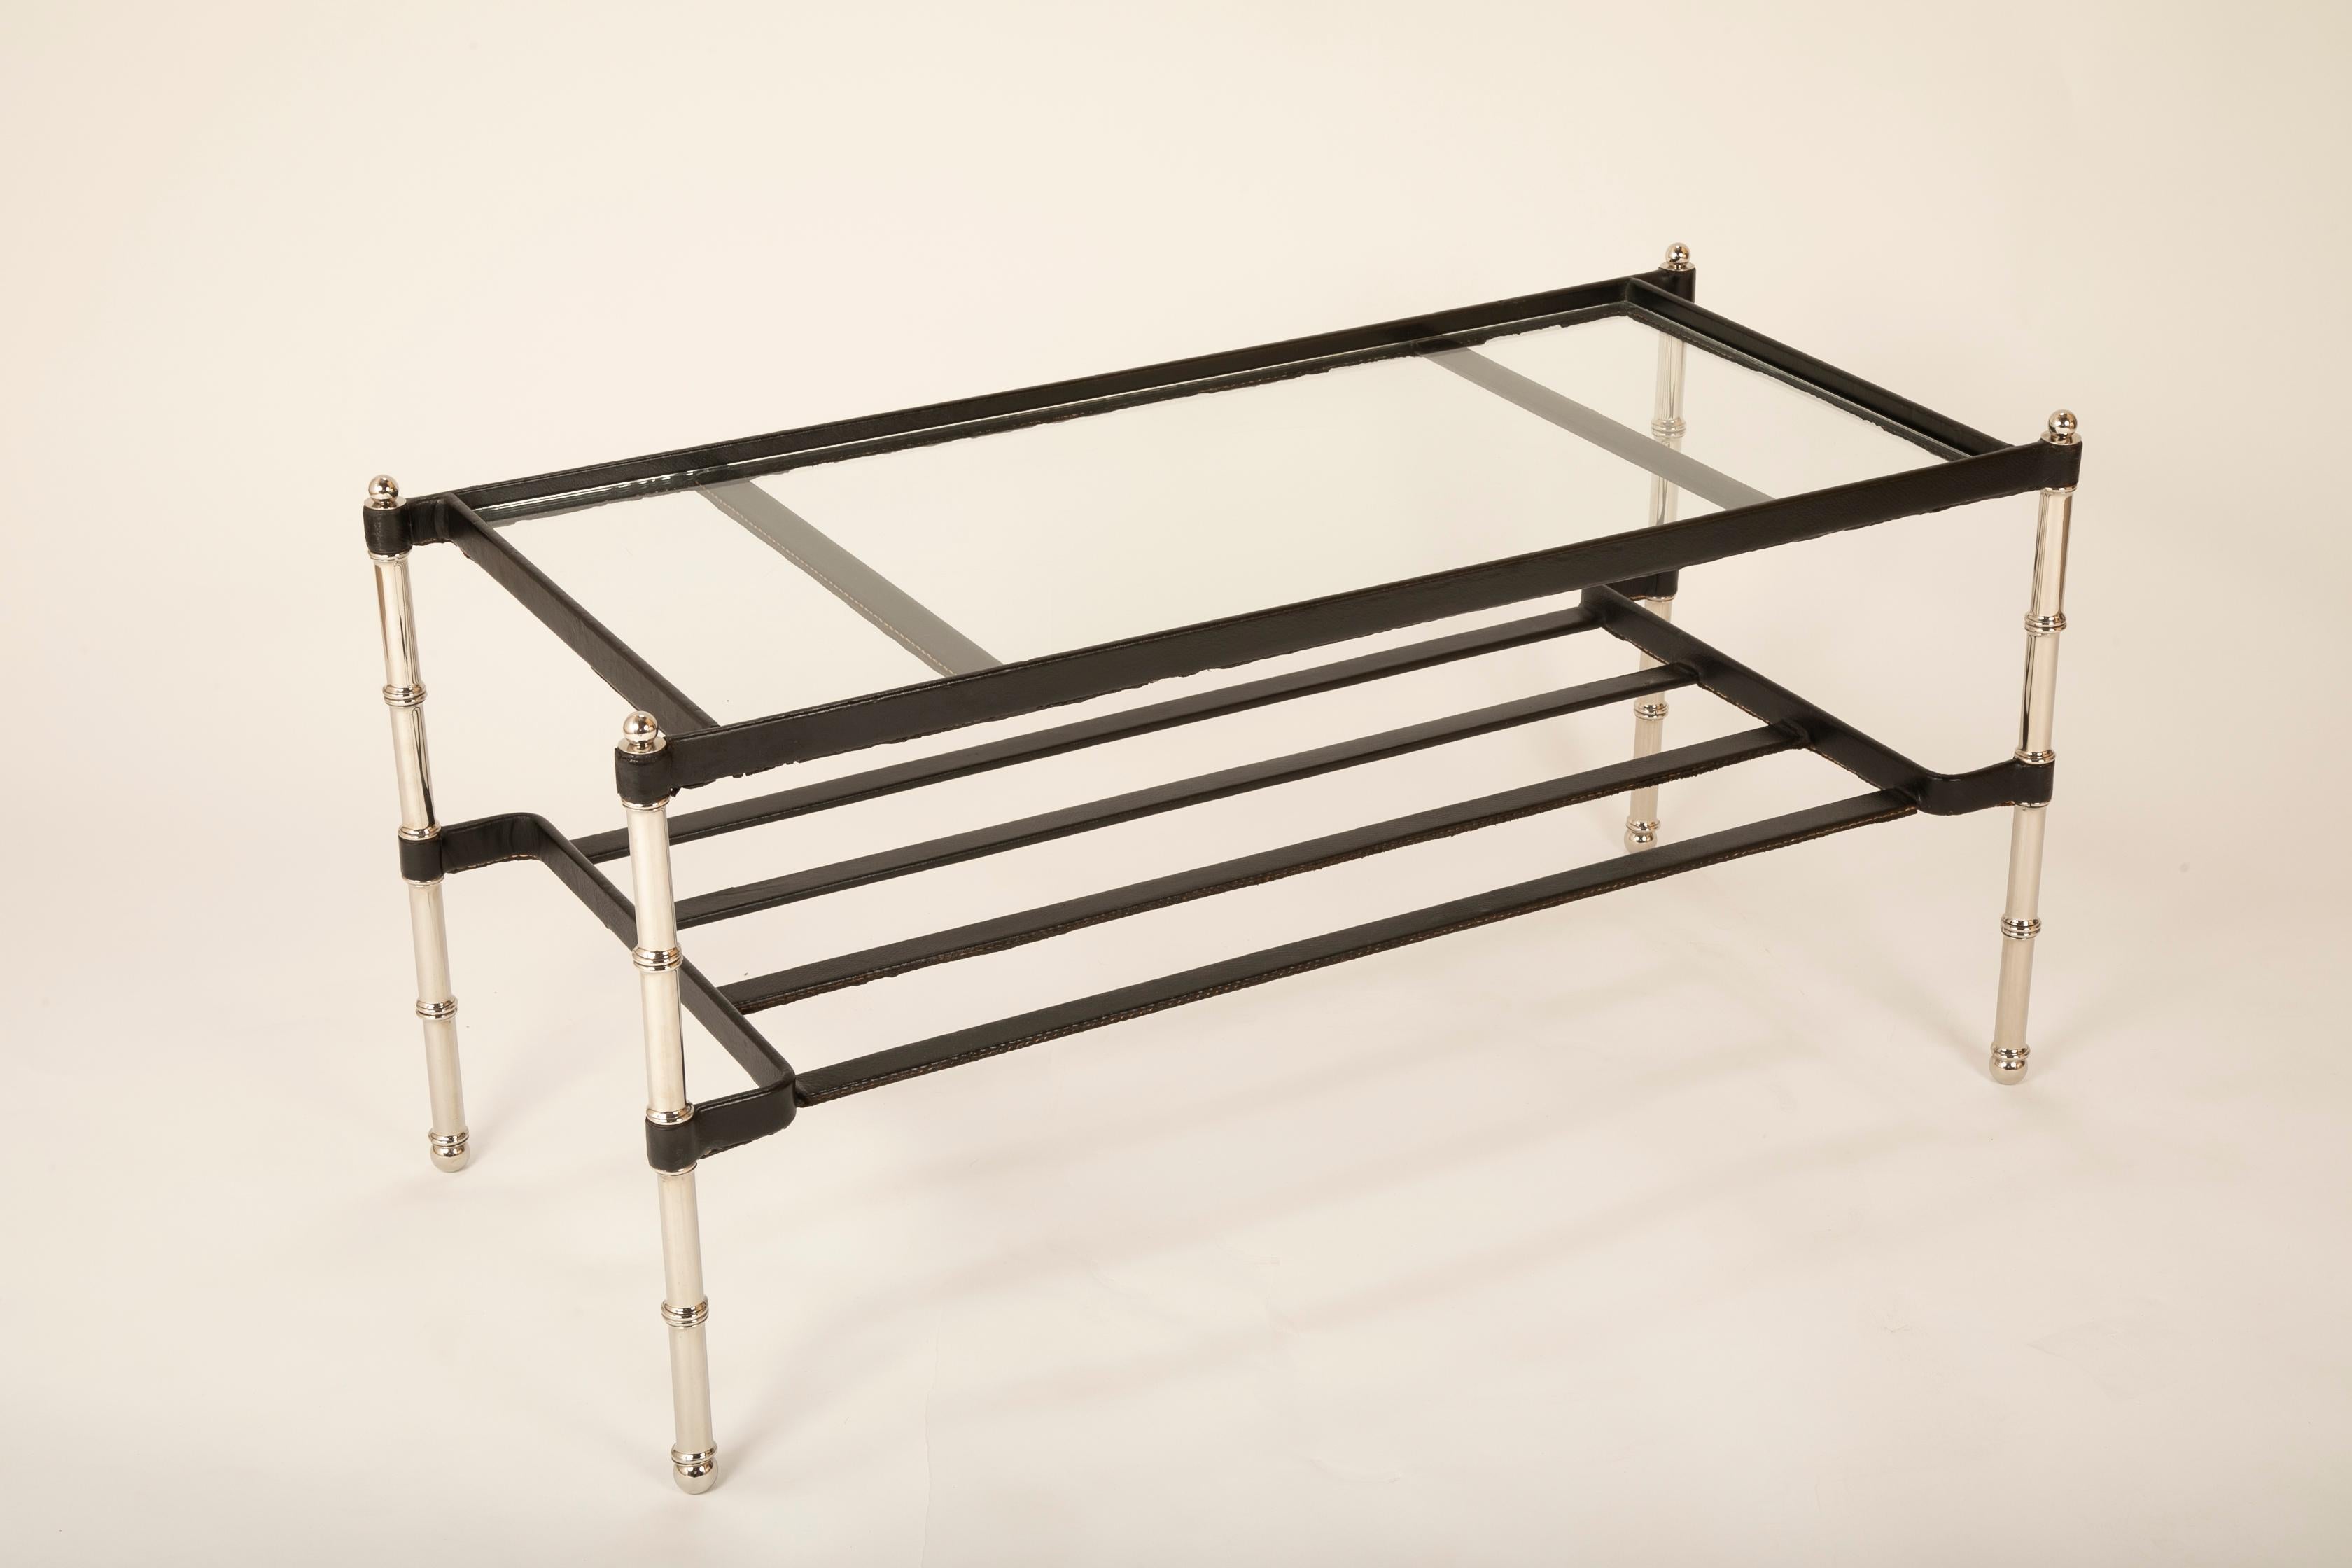 A hand stitched leather wrapped chrome coffee table designed by Jacques Adnet with glass top.